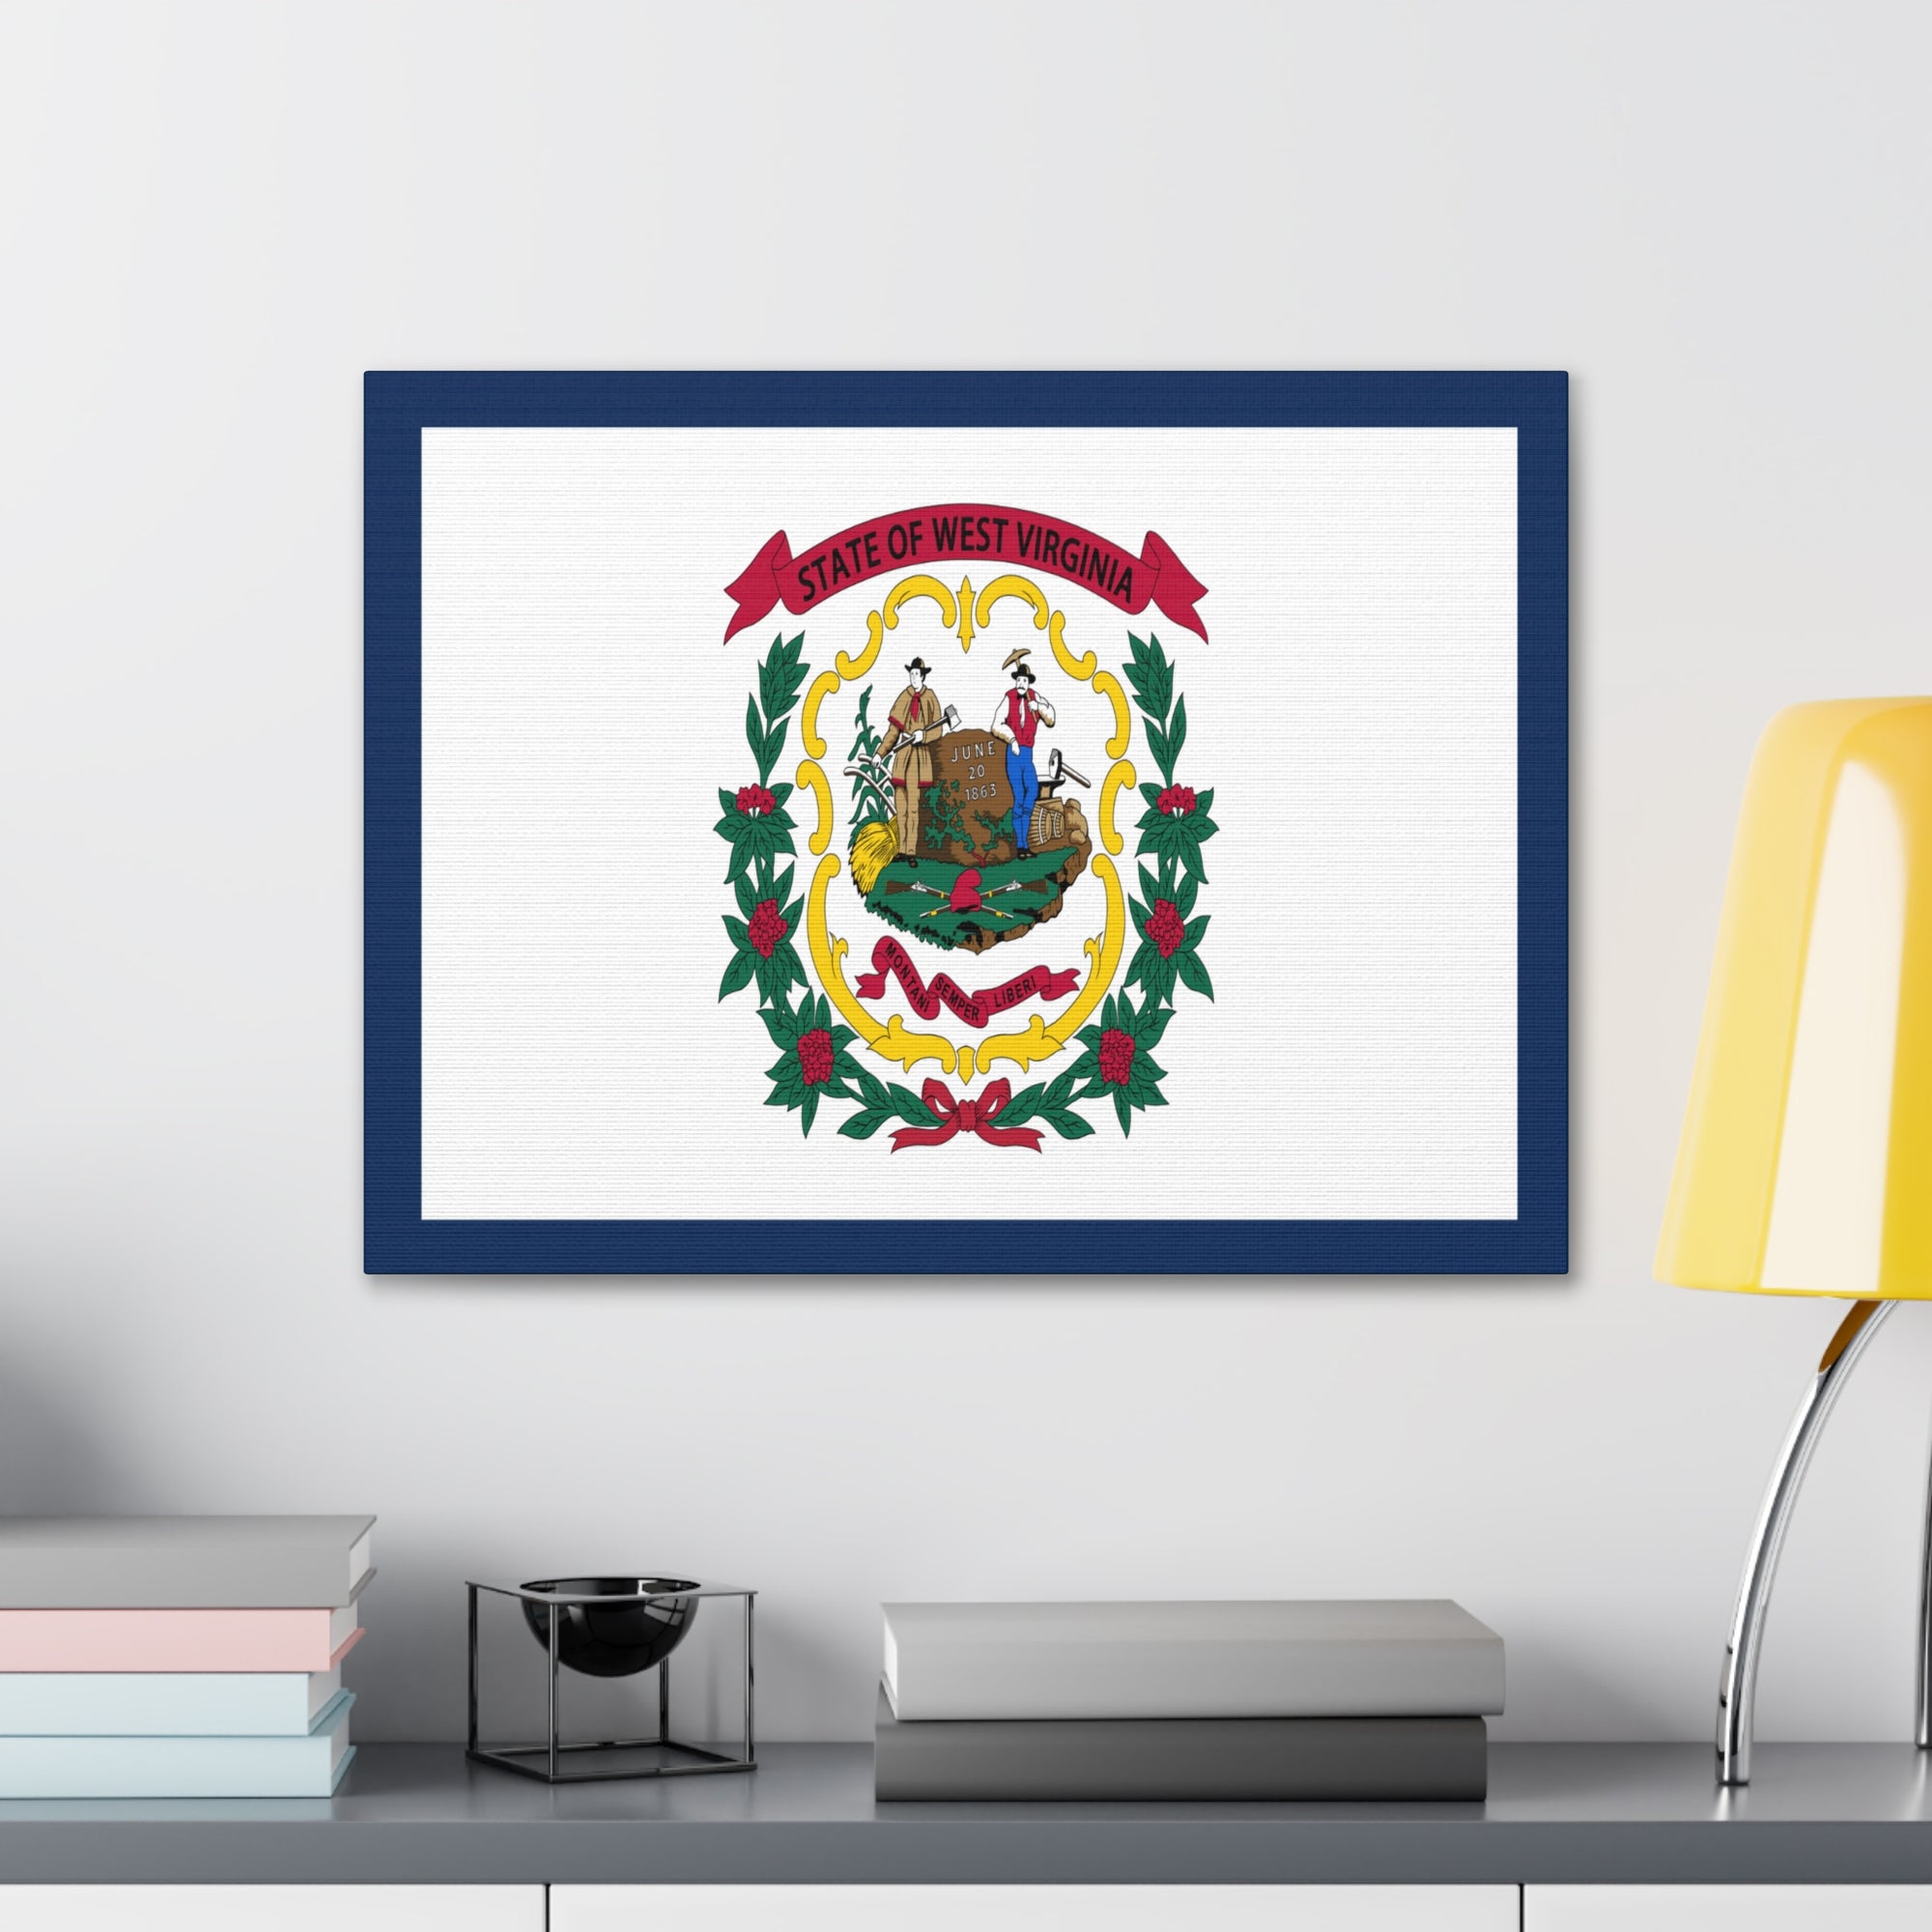 West Virginia Stage Flag Canvas Vibrant Wall Art Unframed Home Decor-Express Your Love Gifts